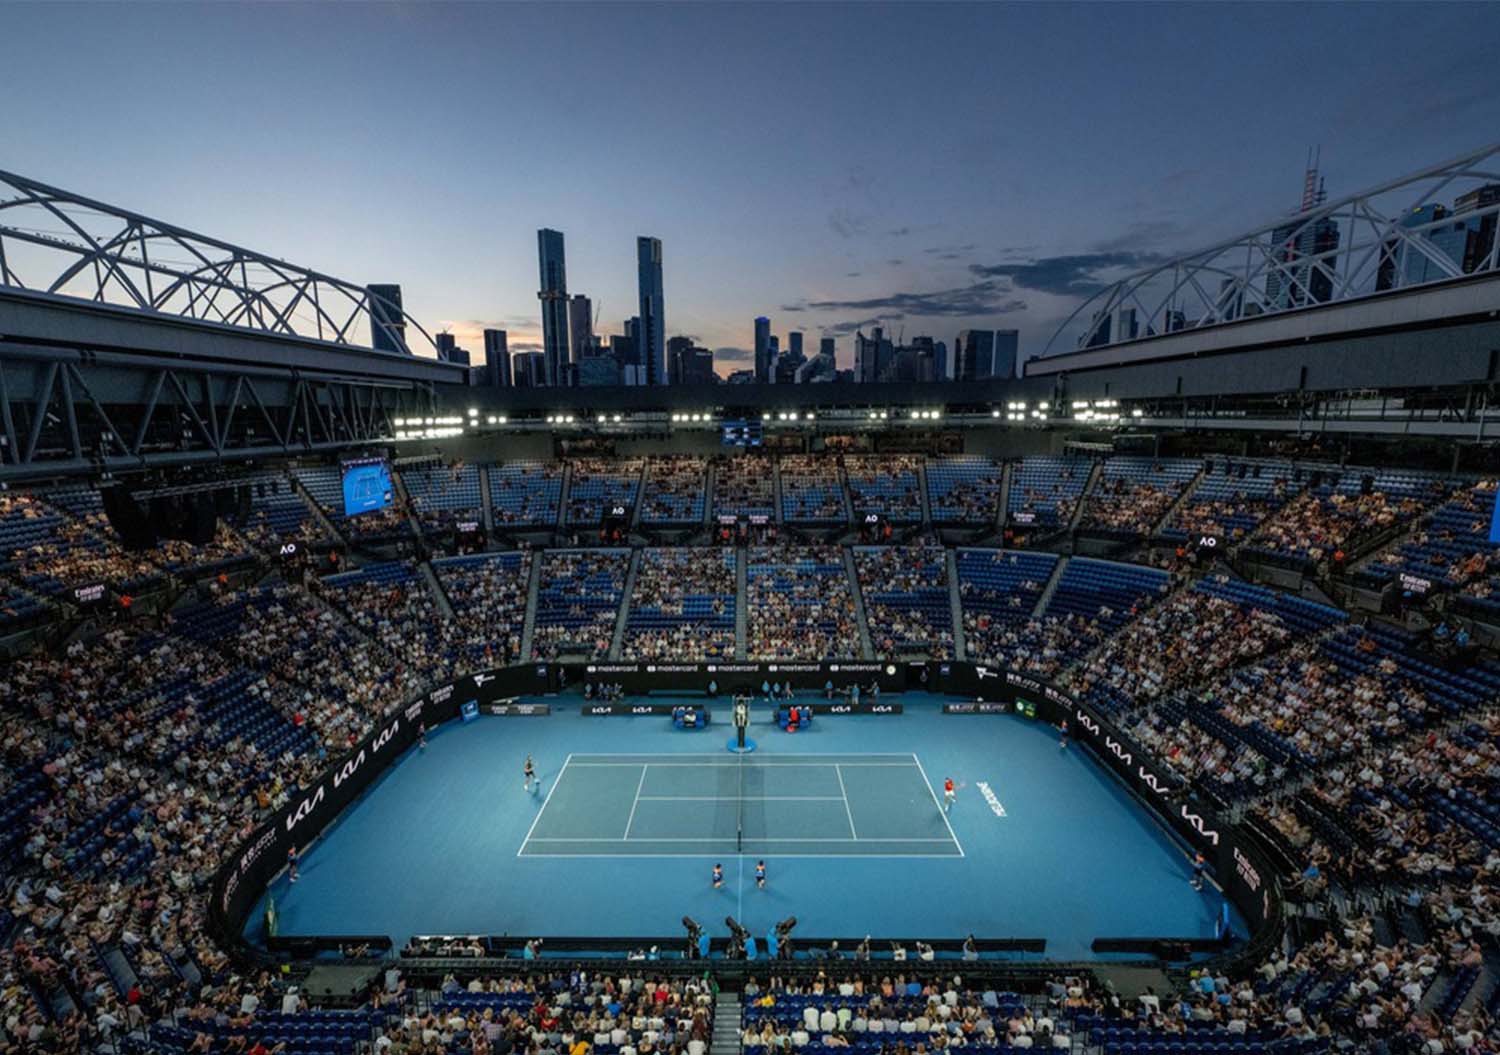 ROLEX RETURNS TO MELBOURNE FOR 15TH YEAR AS OFFICIAL TIMEKEEPER OF SEASON-OPENING AUSTRALIAN OPEN